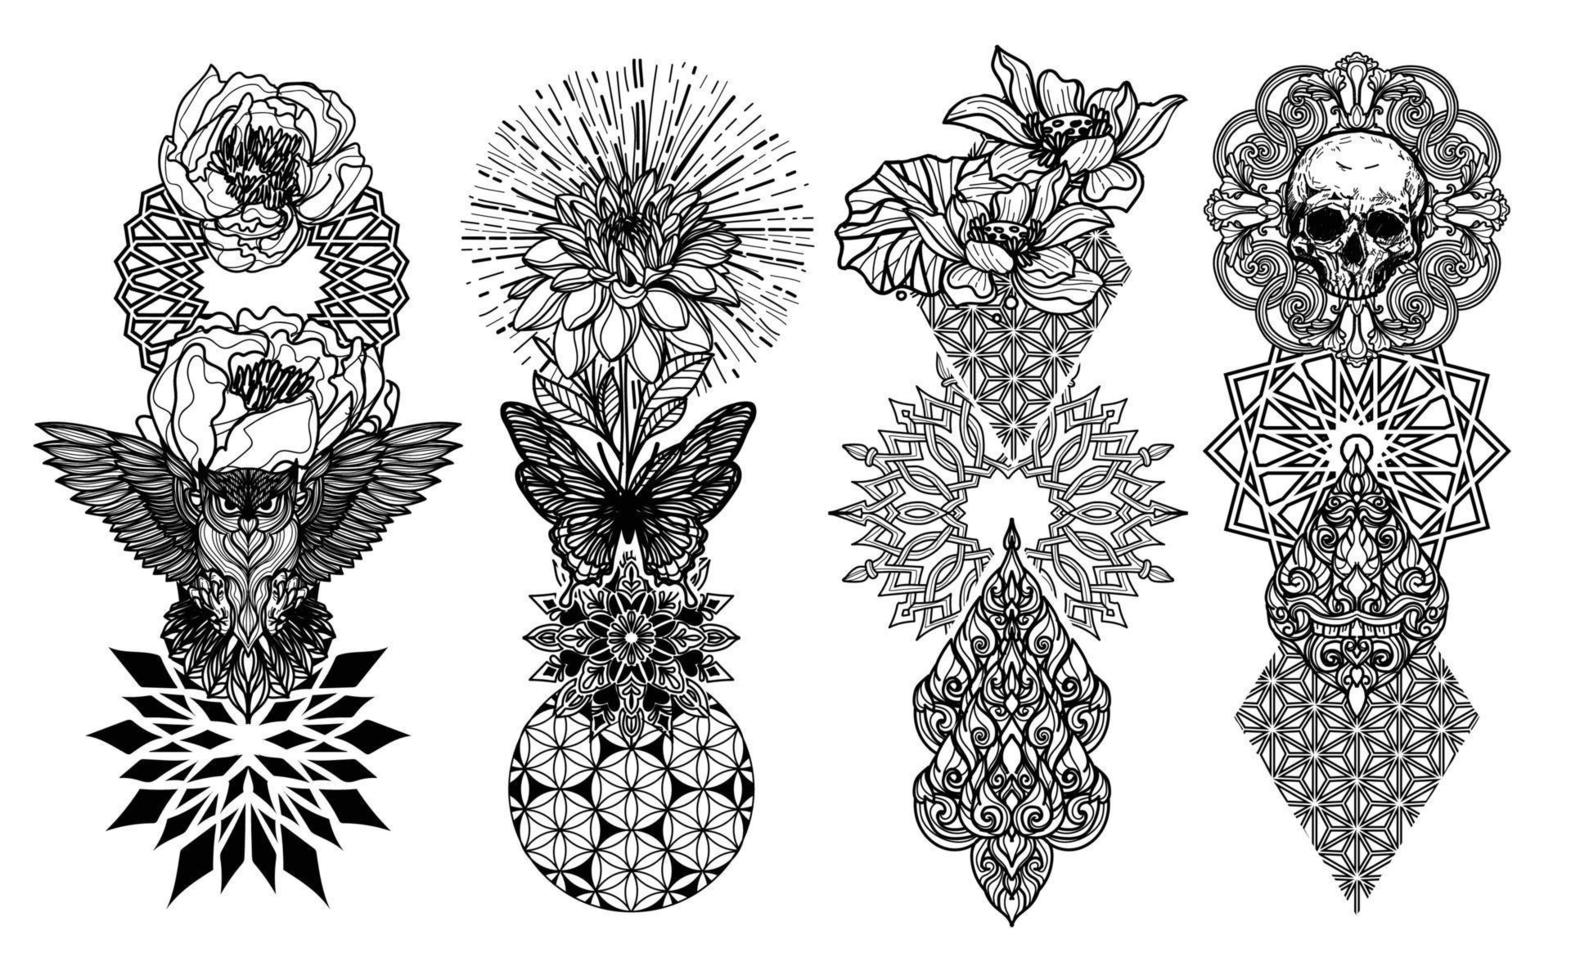 Tattoo art animal bird skull butterfly and flower hand drawing and sketch black and white vector